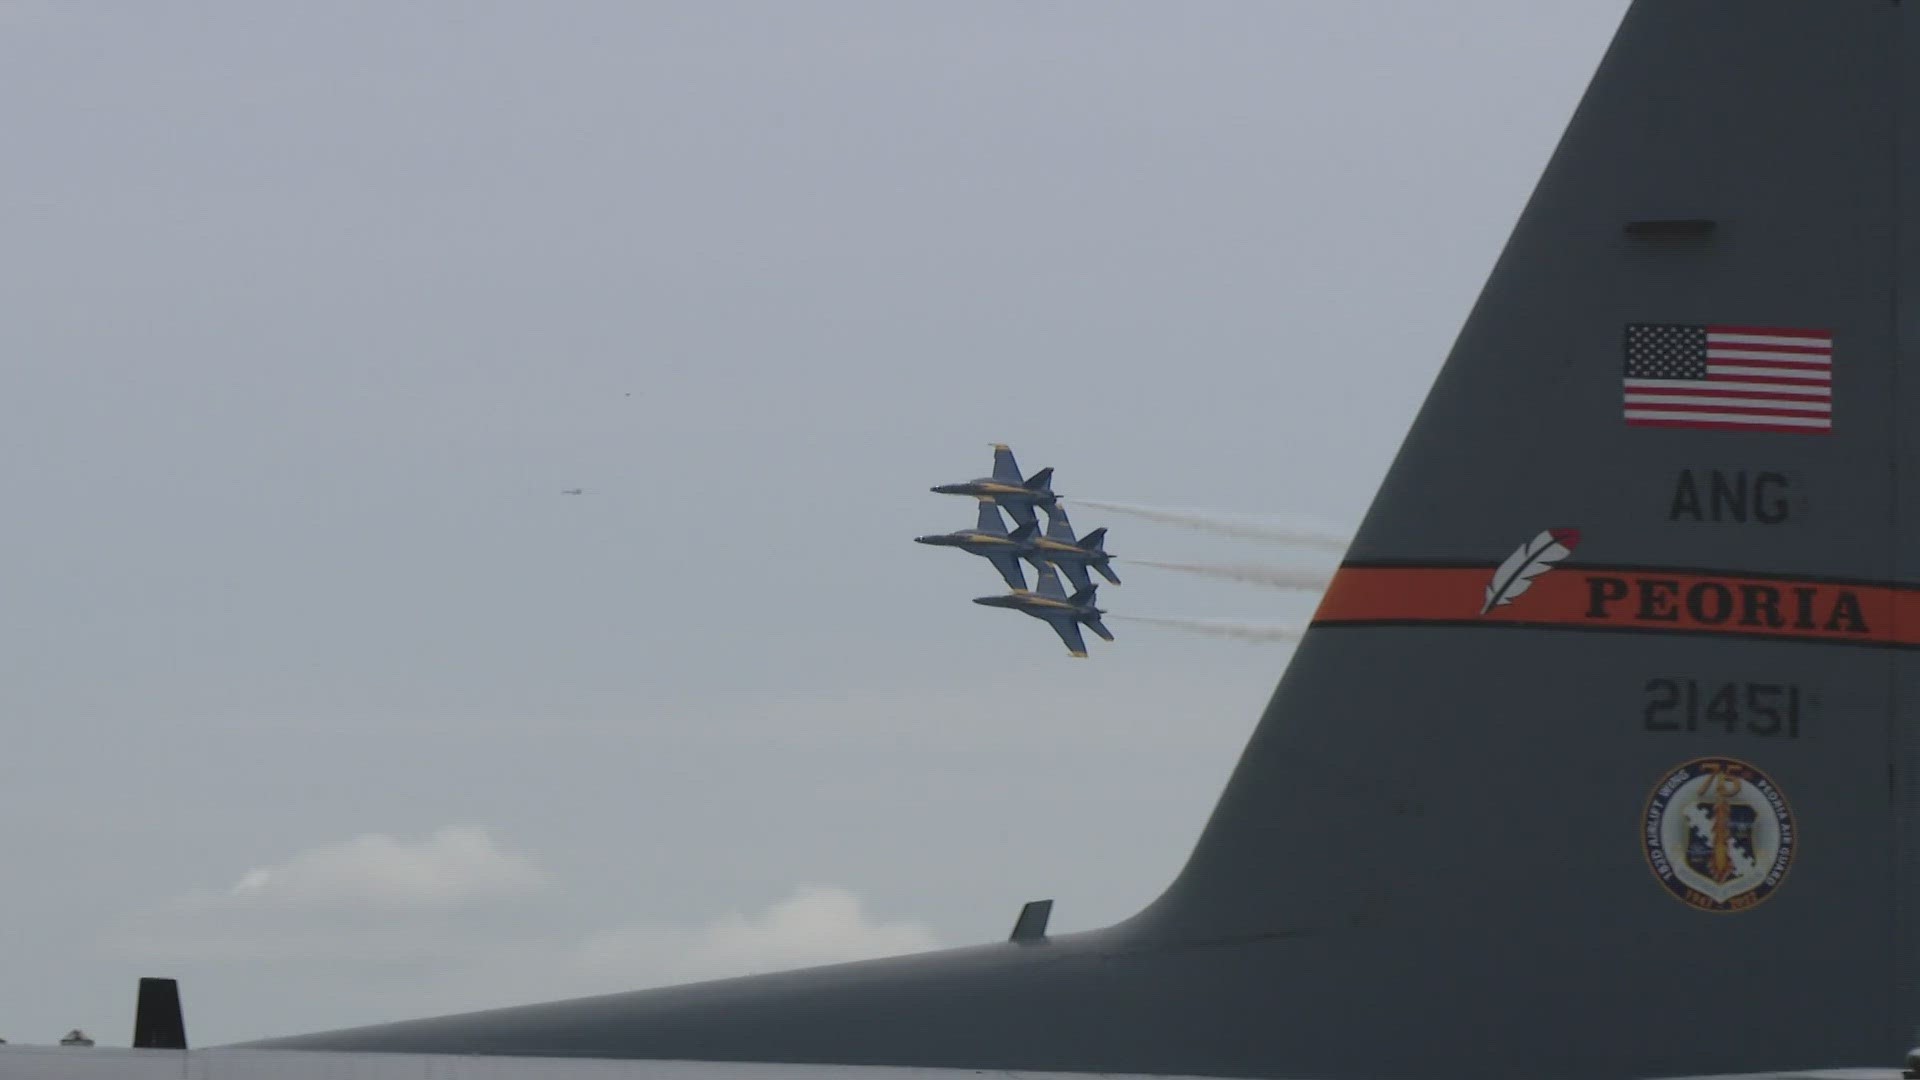 The Blue Angels No. 7 jet will make a landing at the Spirit of St. Louis Airport on Monday. Tickets for next year's event also go on sale Monday.